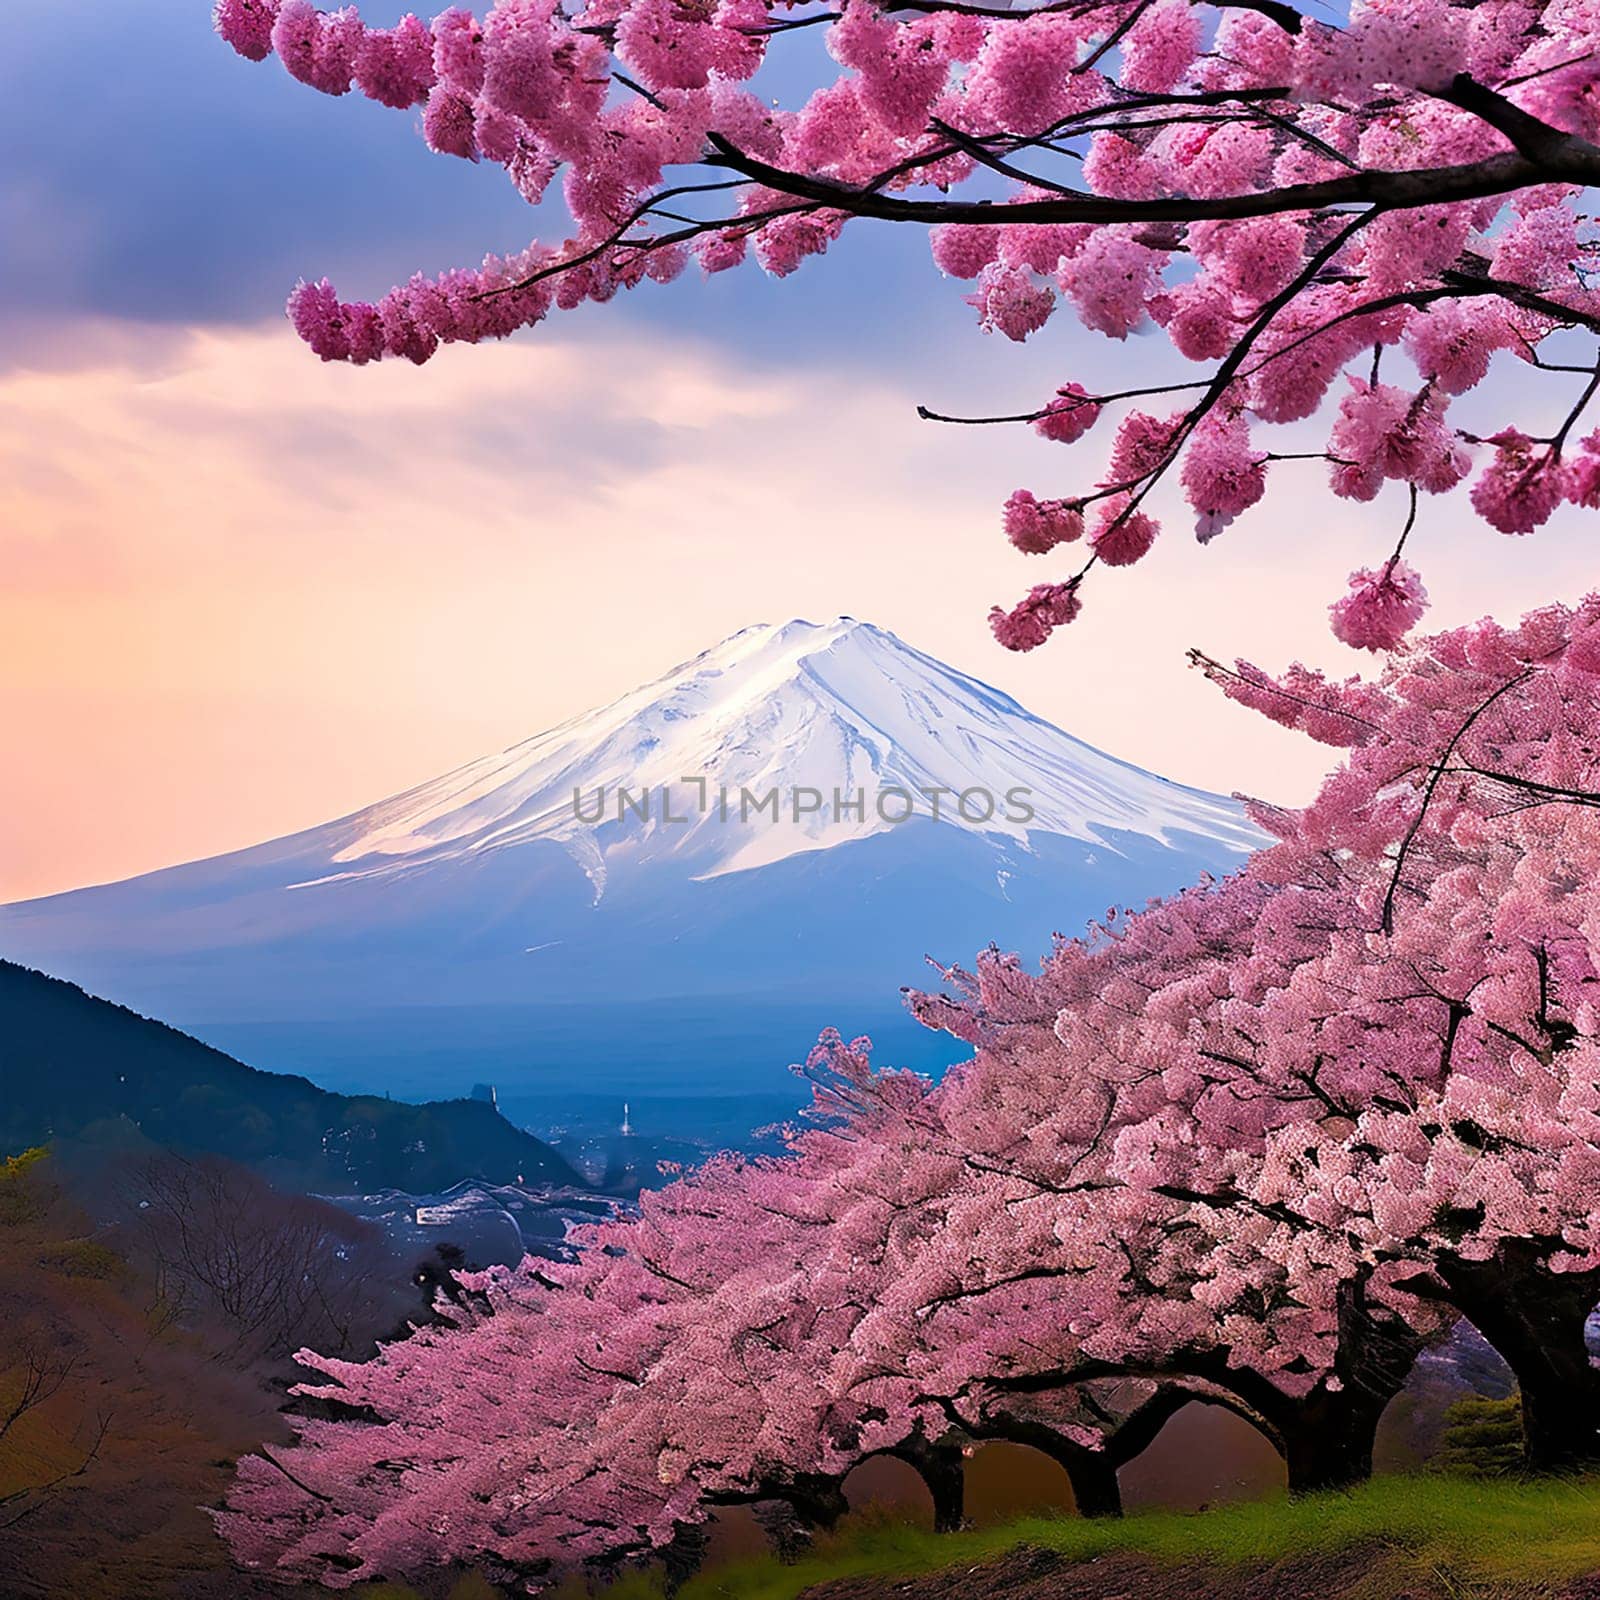 Japan's Spring Canvas: Fuji Mountain and Cherry Blossoms